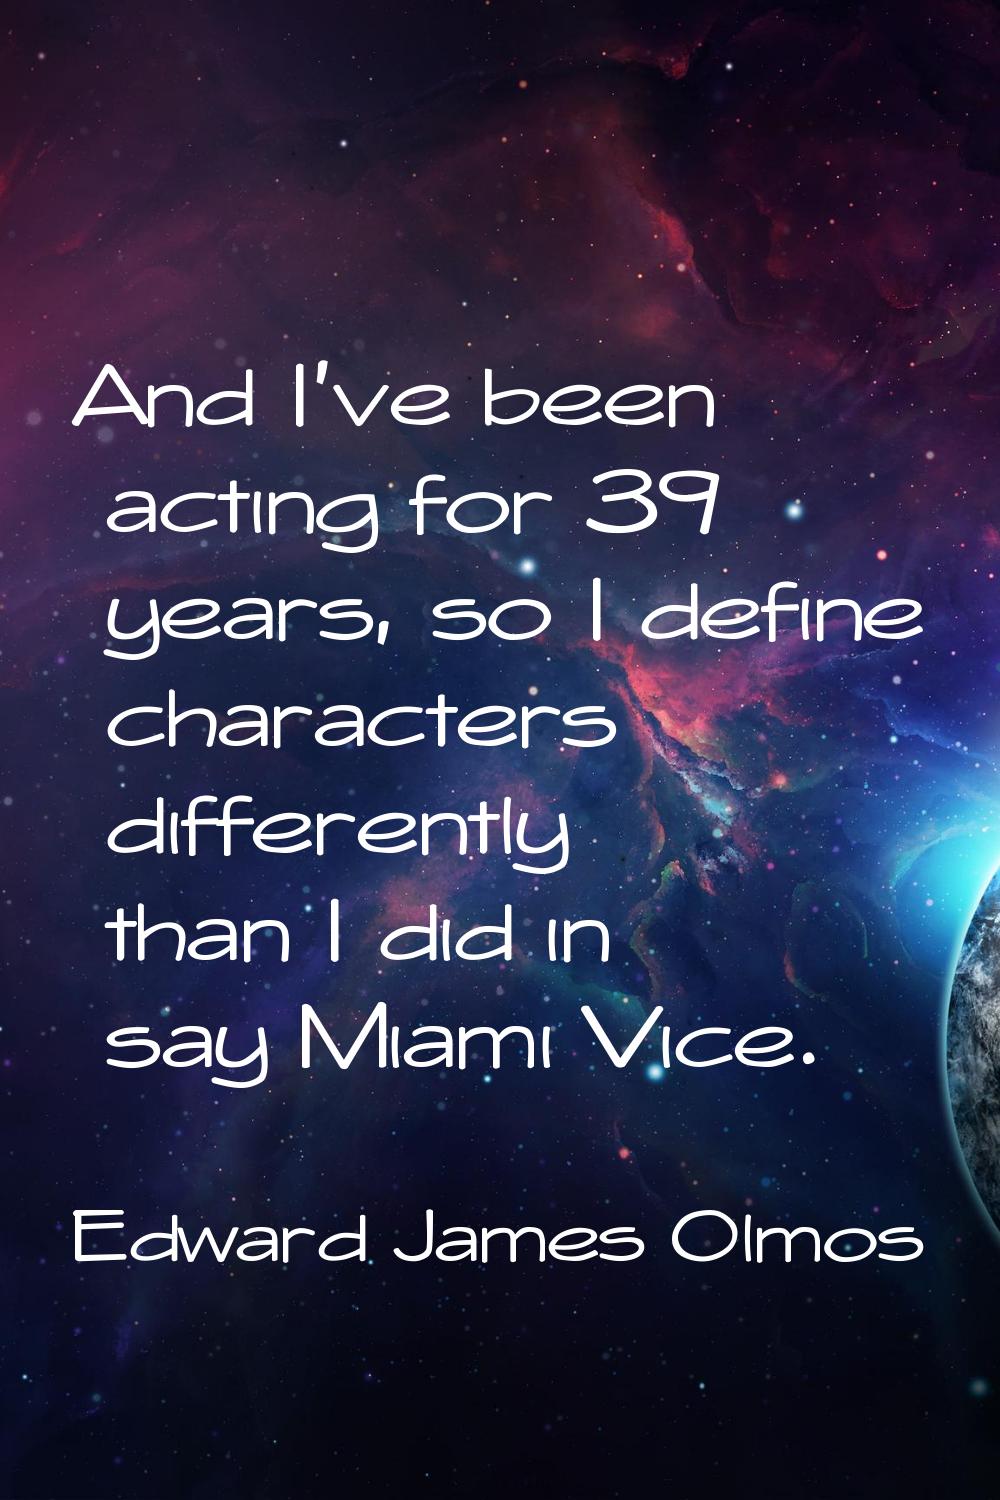 And I've been acting for 39 years, so I define characters differently than I did in say Miami Vice.